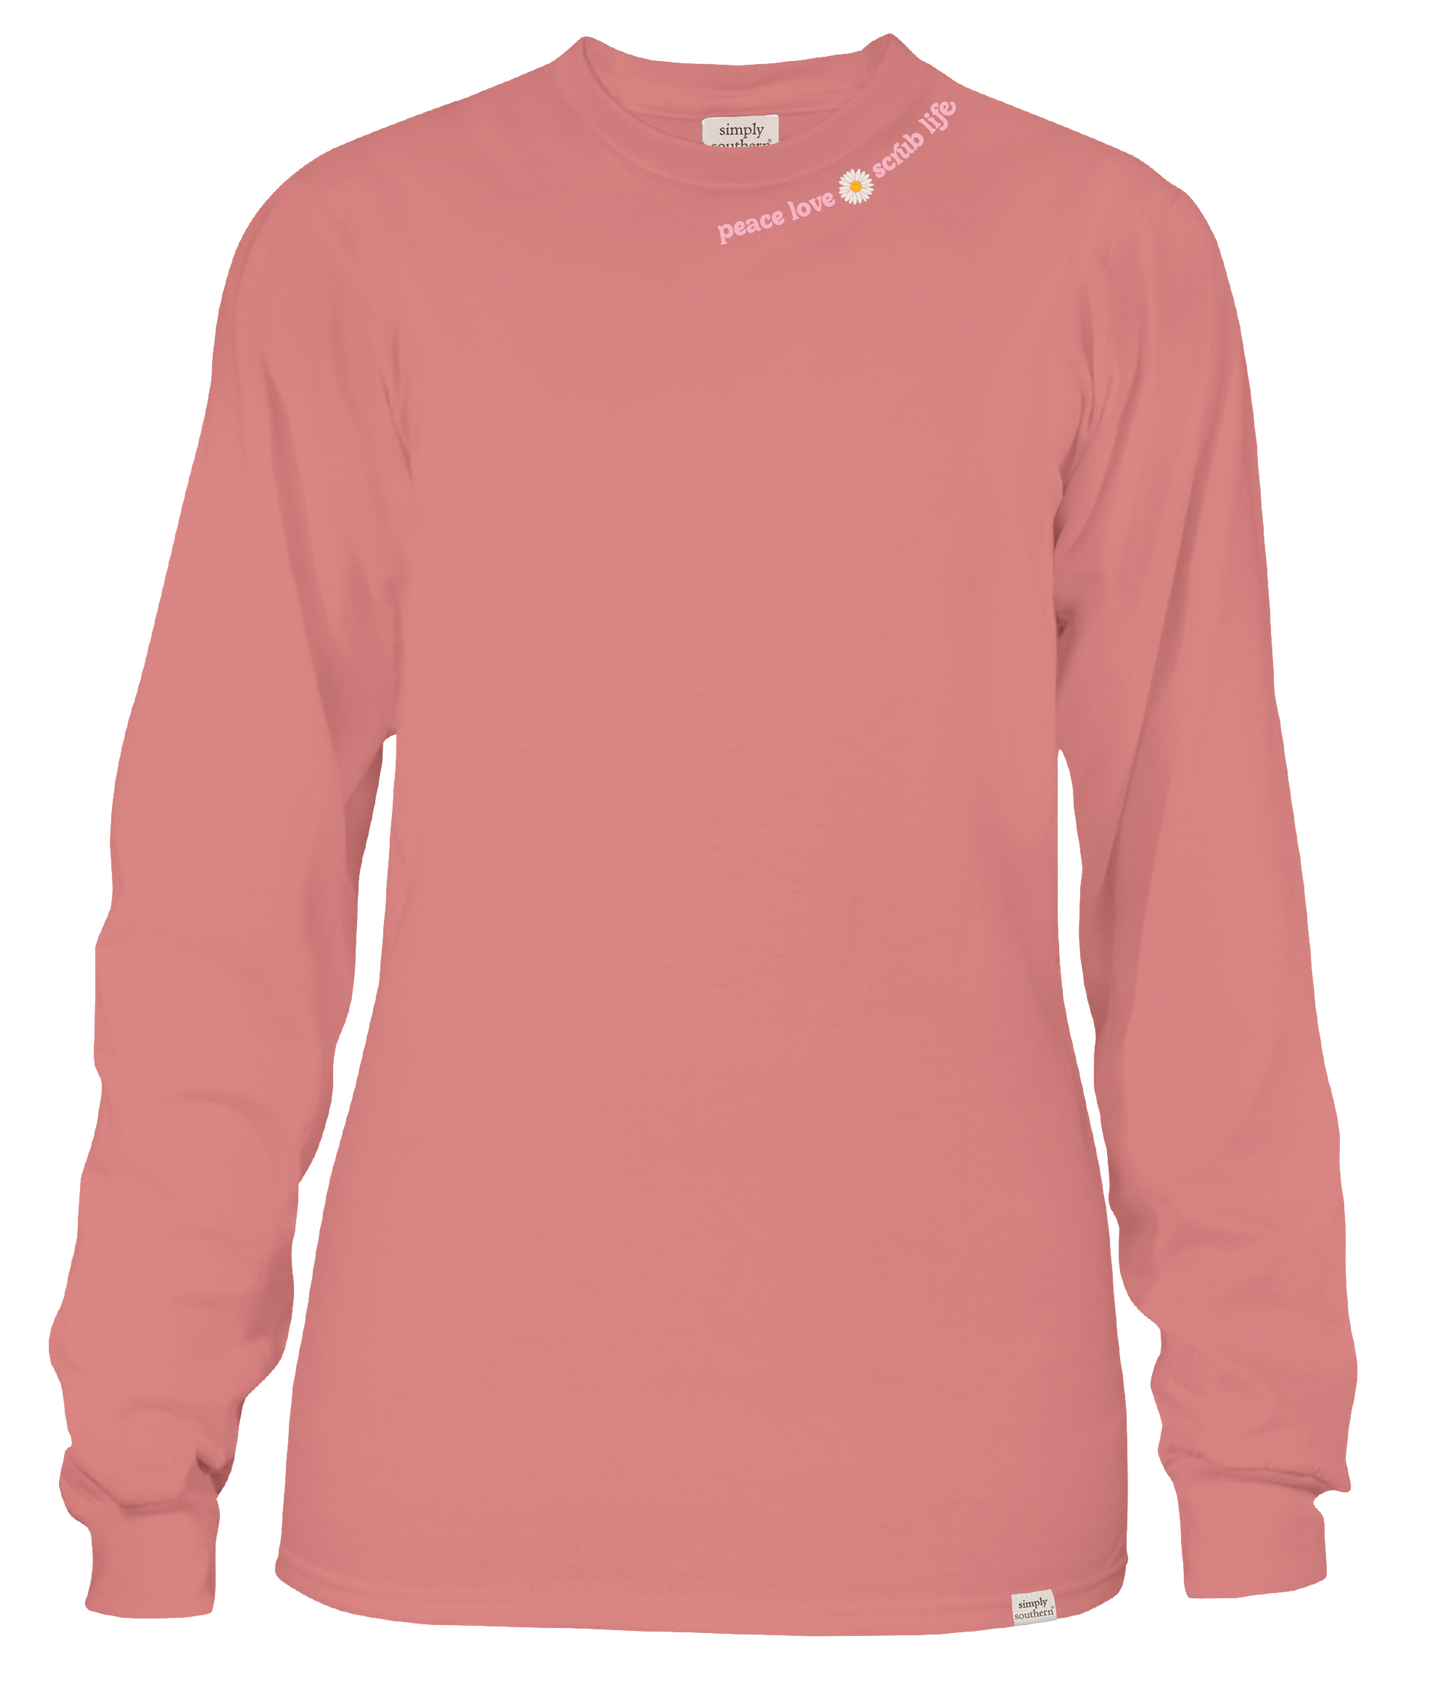 "It's A Good Day To Save Lives" Nurse Long Sleeve Shirt